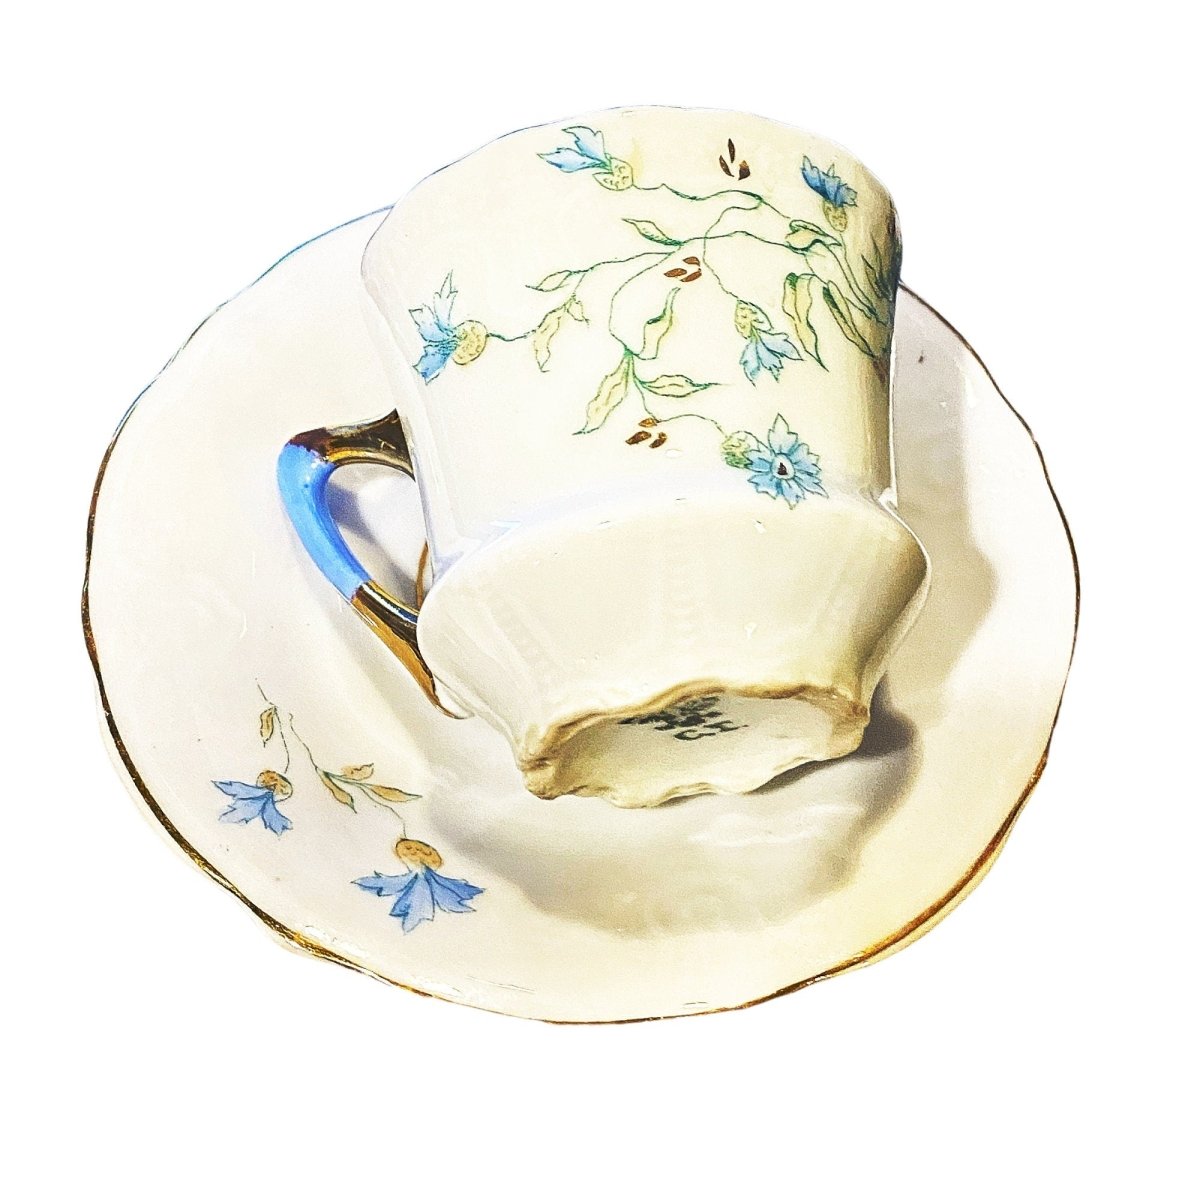 Carl Tielsch | Art Nouveau/Deco | Turquoise floral Tea Cup & Saucer with gold rim, and blue banded handle c. 1875-95, Silesia Germany (Poland) - Chinamania.shop